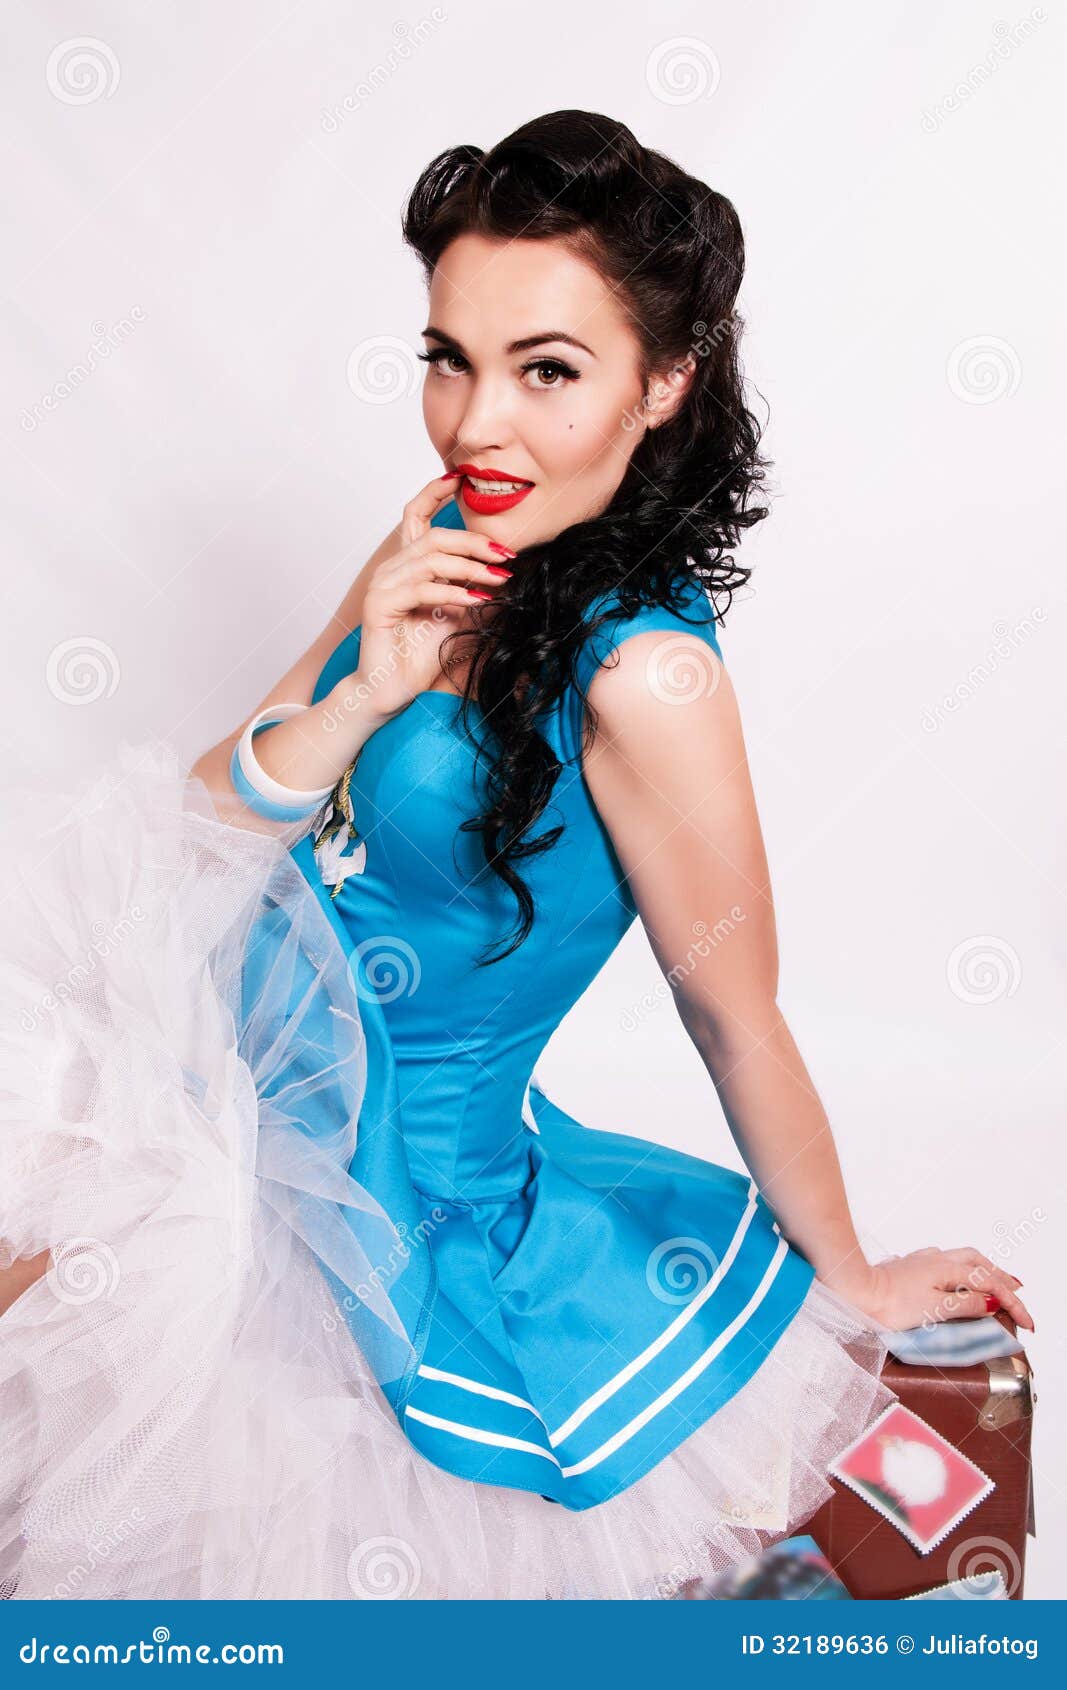 Sailor Pin Up Girl With Bright Make Up Sitting On A